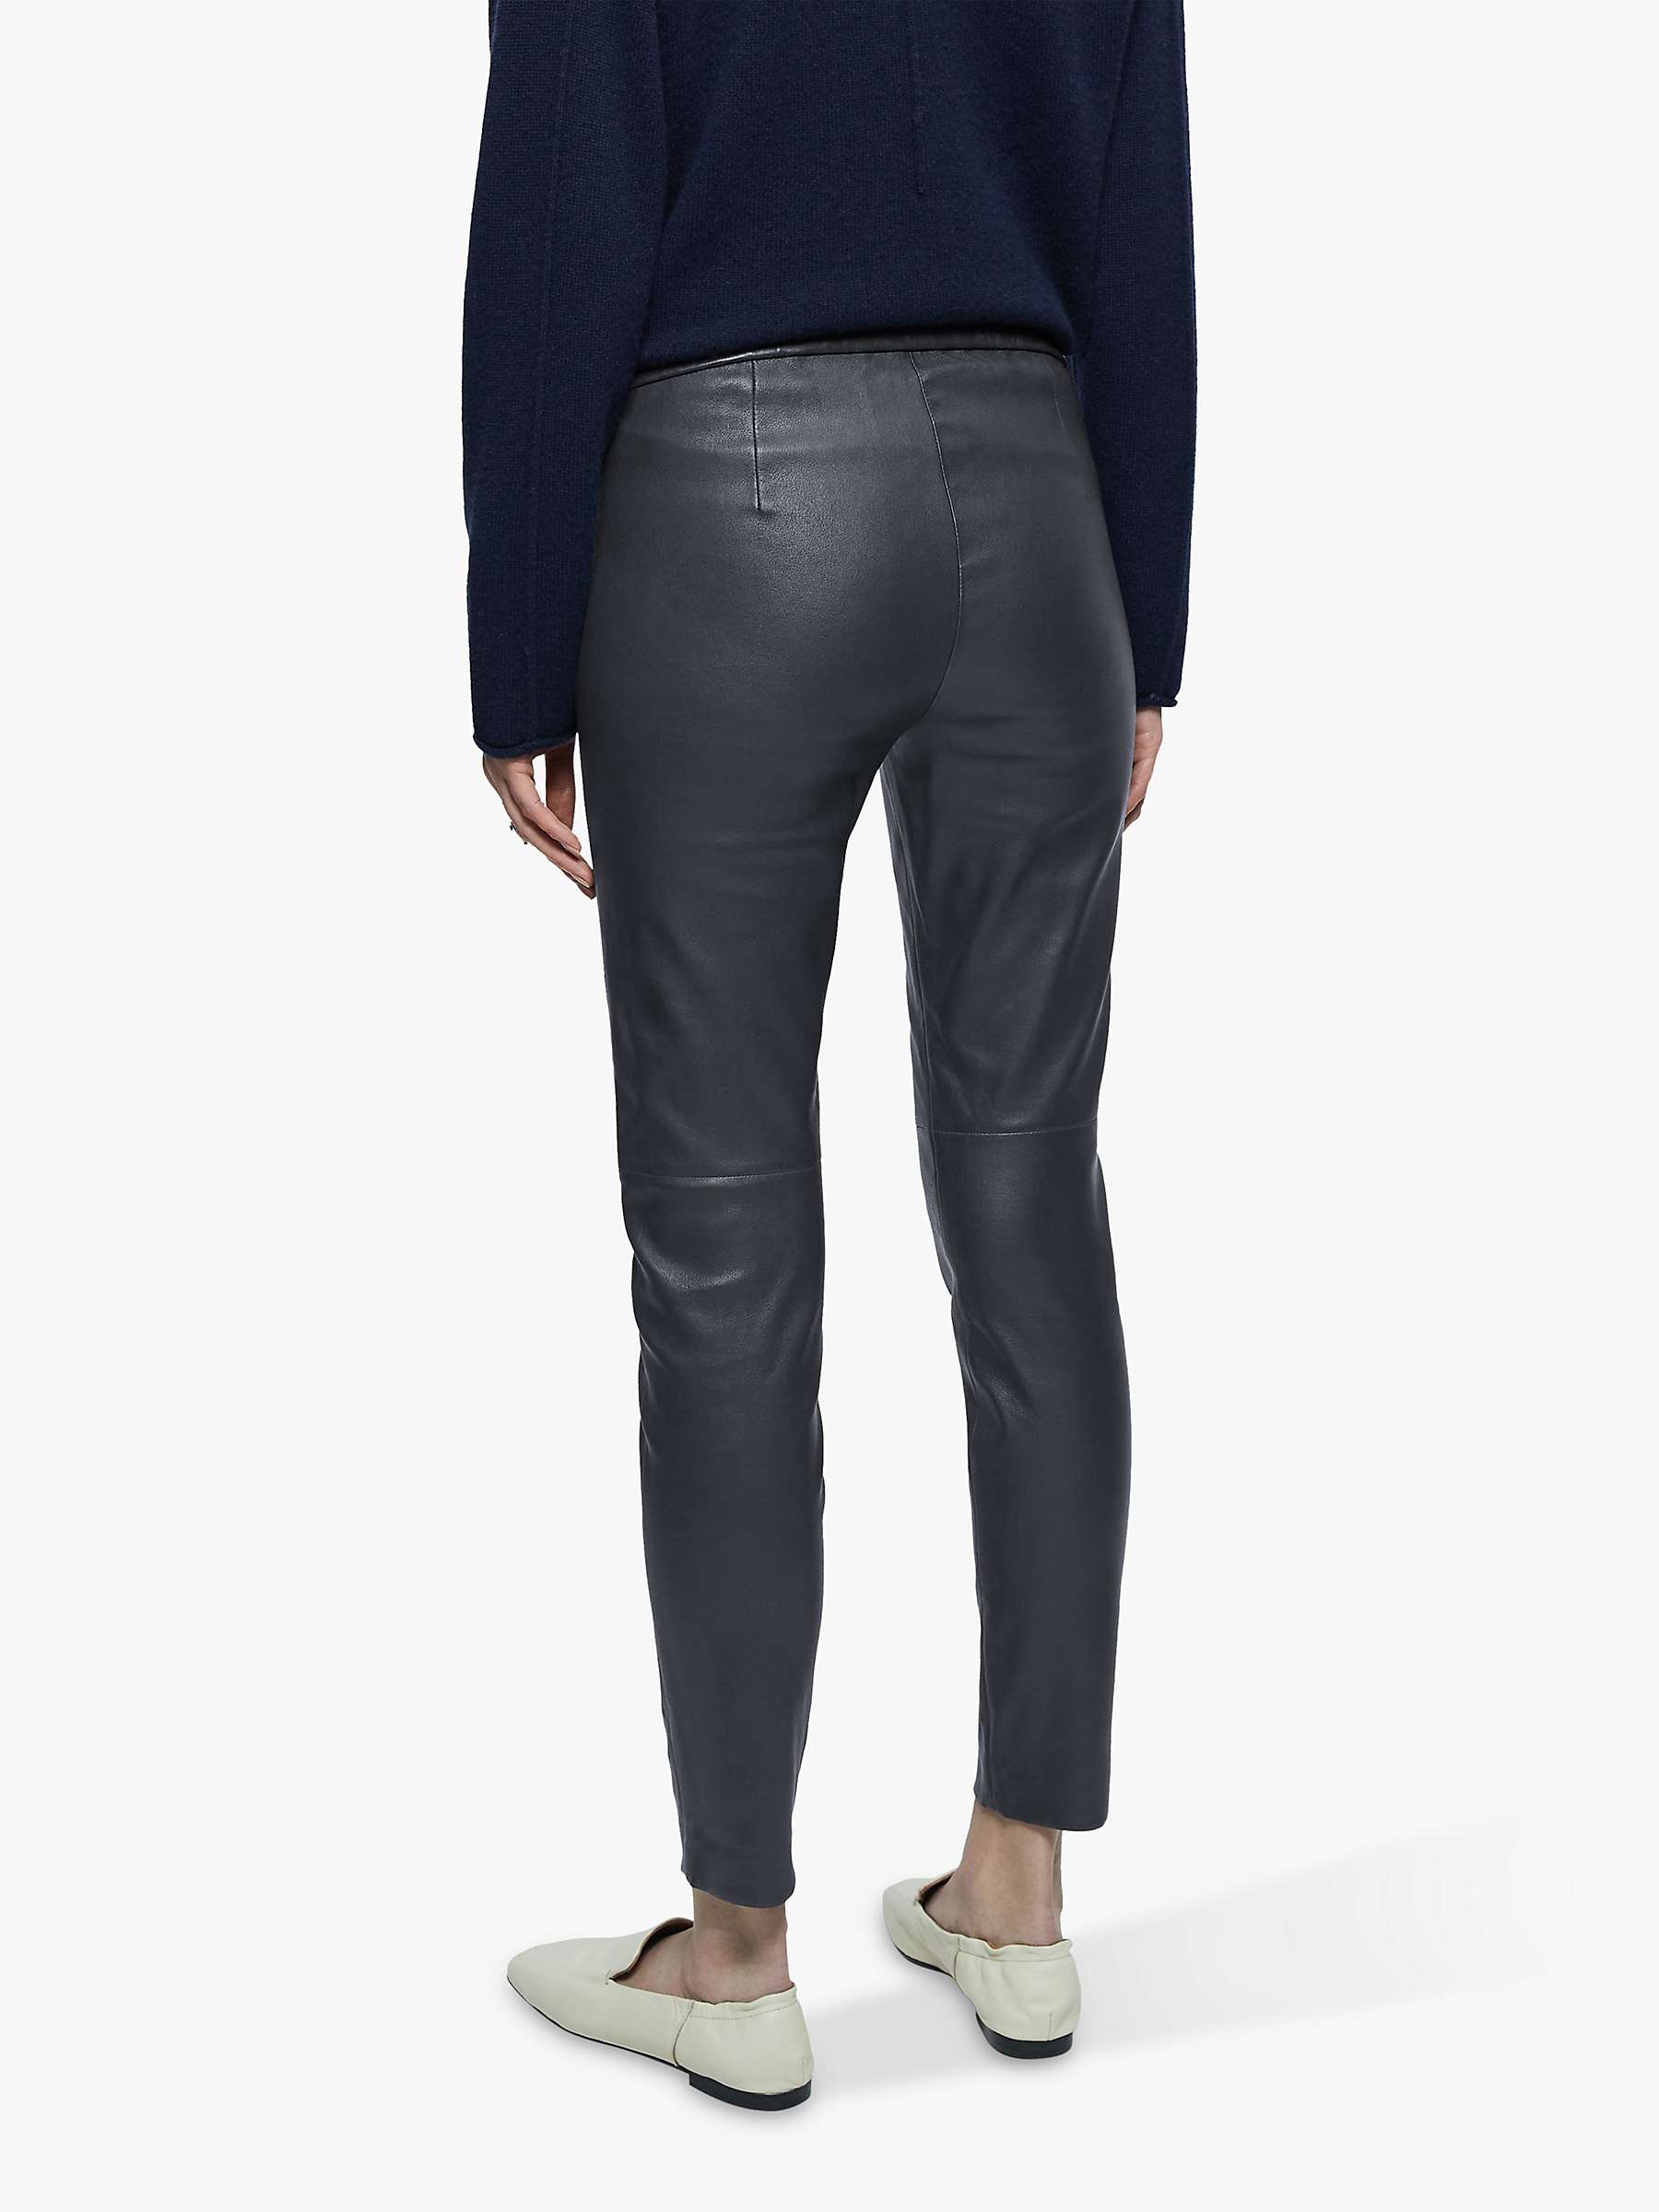 Buy Jigsaw Stretch Leather Leggings Online at johnlewis.com